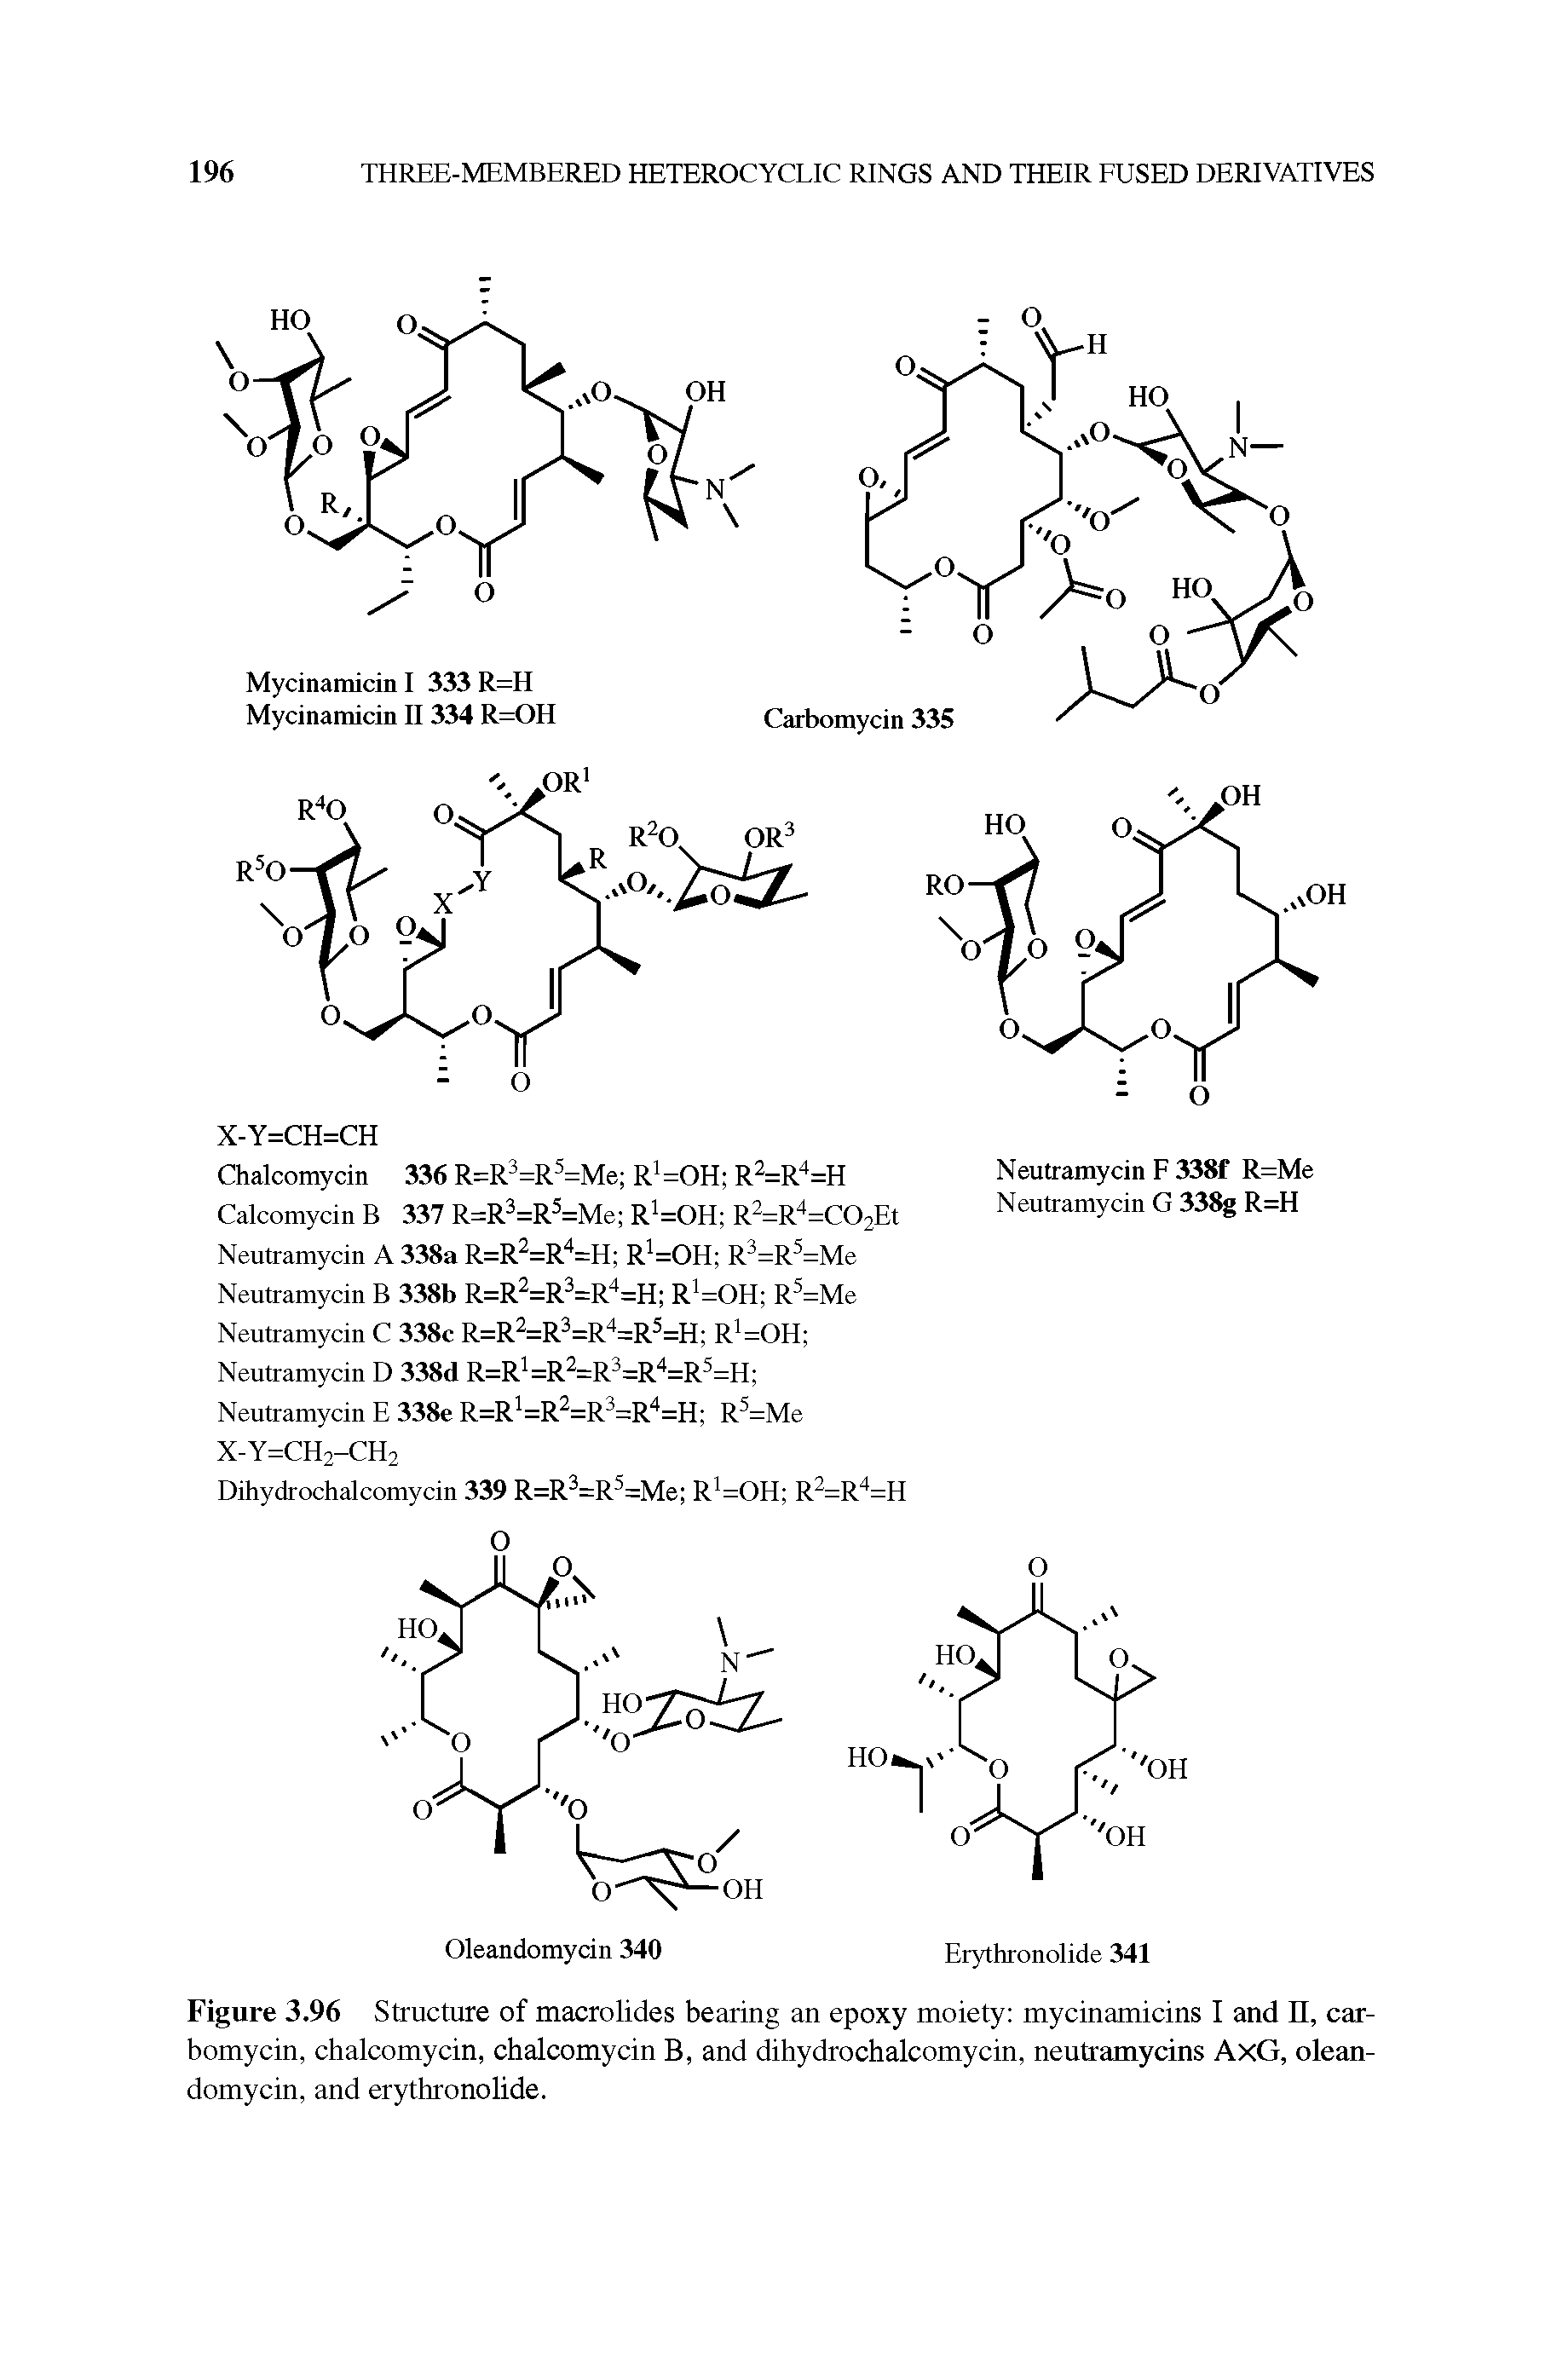 Figure 3.96 Structure of macrolides bearing an epoxy moiety mycinamicins I and n, carbomycin, chalcomycin, chalcomycin B, and dihydrochalcomycin, neutramycins AxG, oleandomycin, and erythronolide.